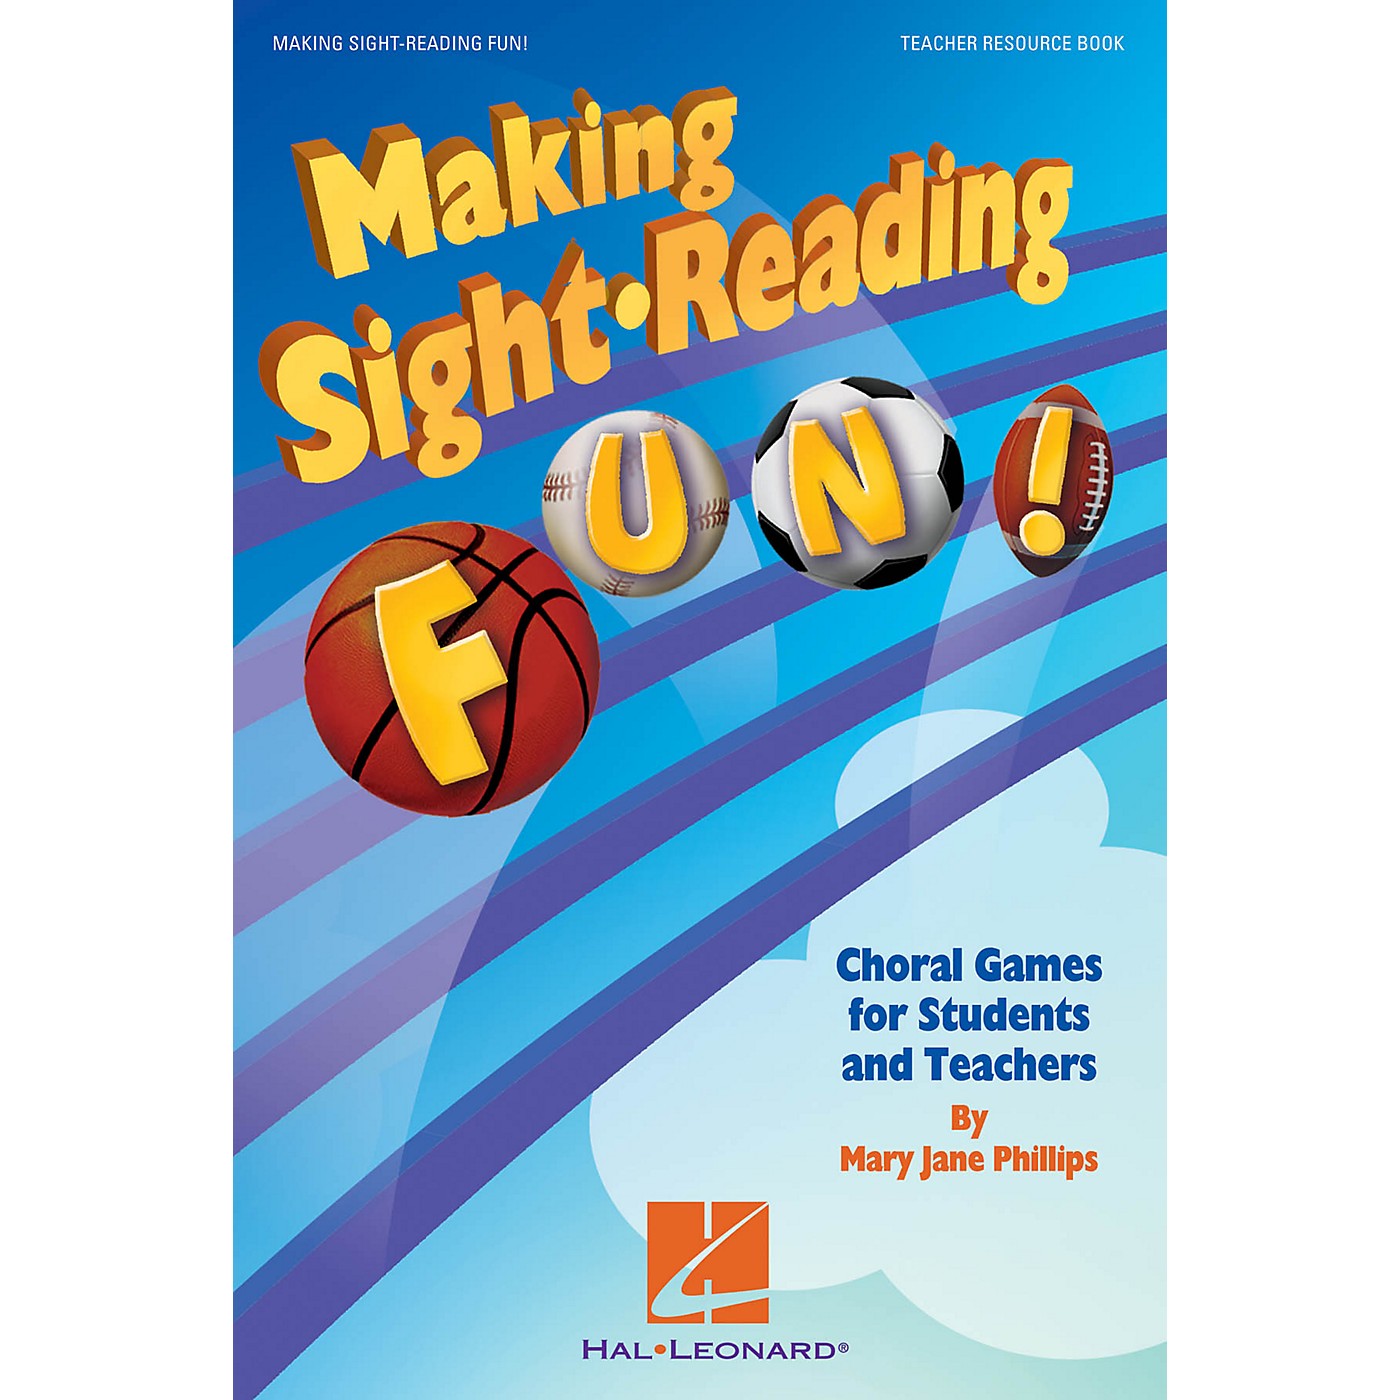 Hal Leonard Making Sight Reading Fun! (Choral Games for Students and Teachers) Book composed by Mary Jane Phillips thumbnail